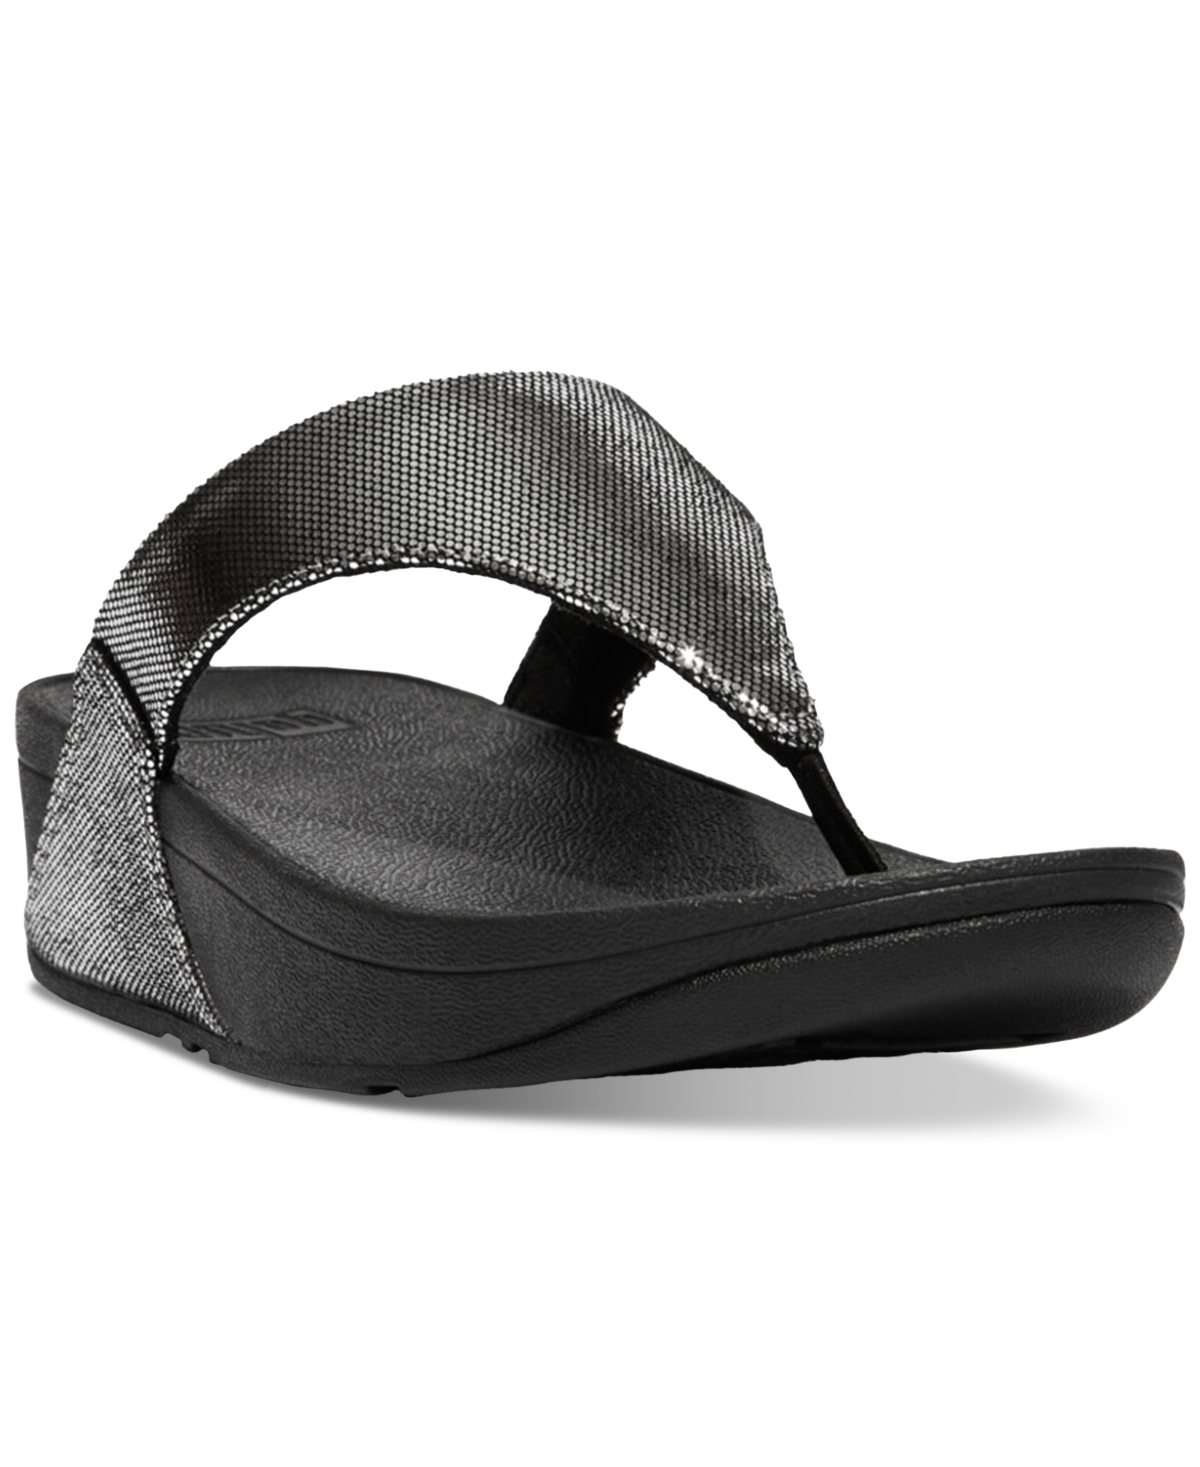 FitFlop Women's Lulu Lustra Wedge Thong Sandals Women's Shoes